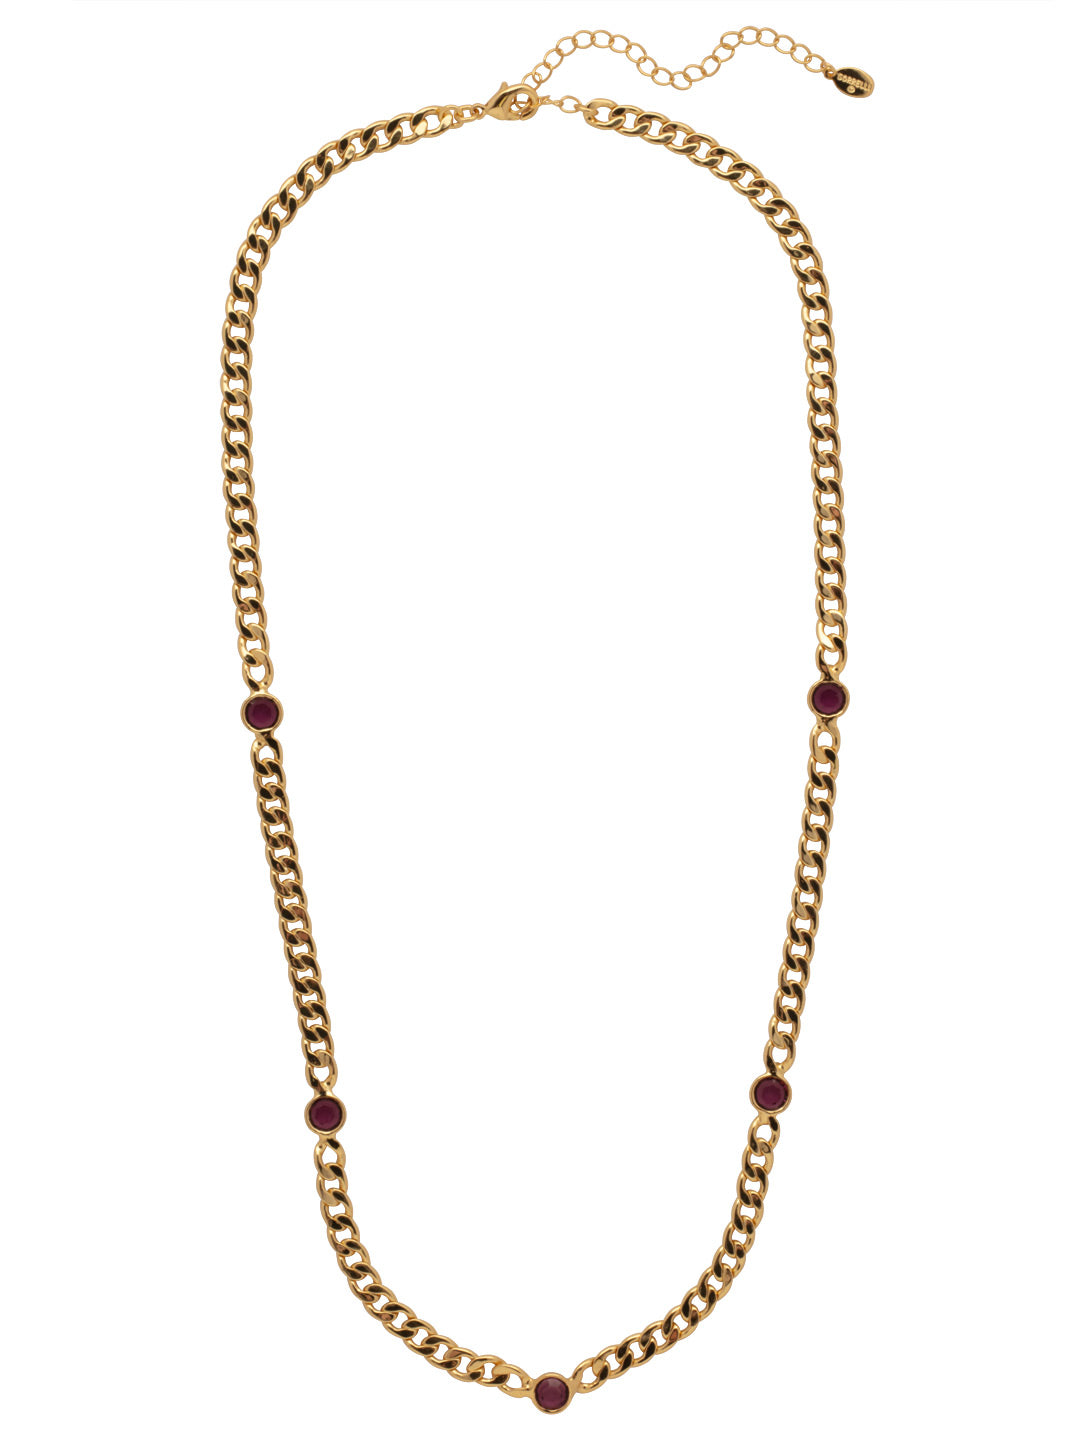 Dewdrop Long Necklace - NFK2BGAM - <p>The Dewdrop Long Necklace features clear cut channels along an adjustable curb chain, secured with a lobster claw clasp. From Sorrelli's Amethyst collection in our Bright Gold-tone finish.</p>